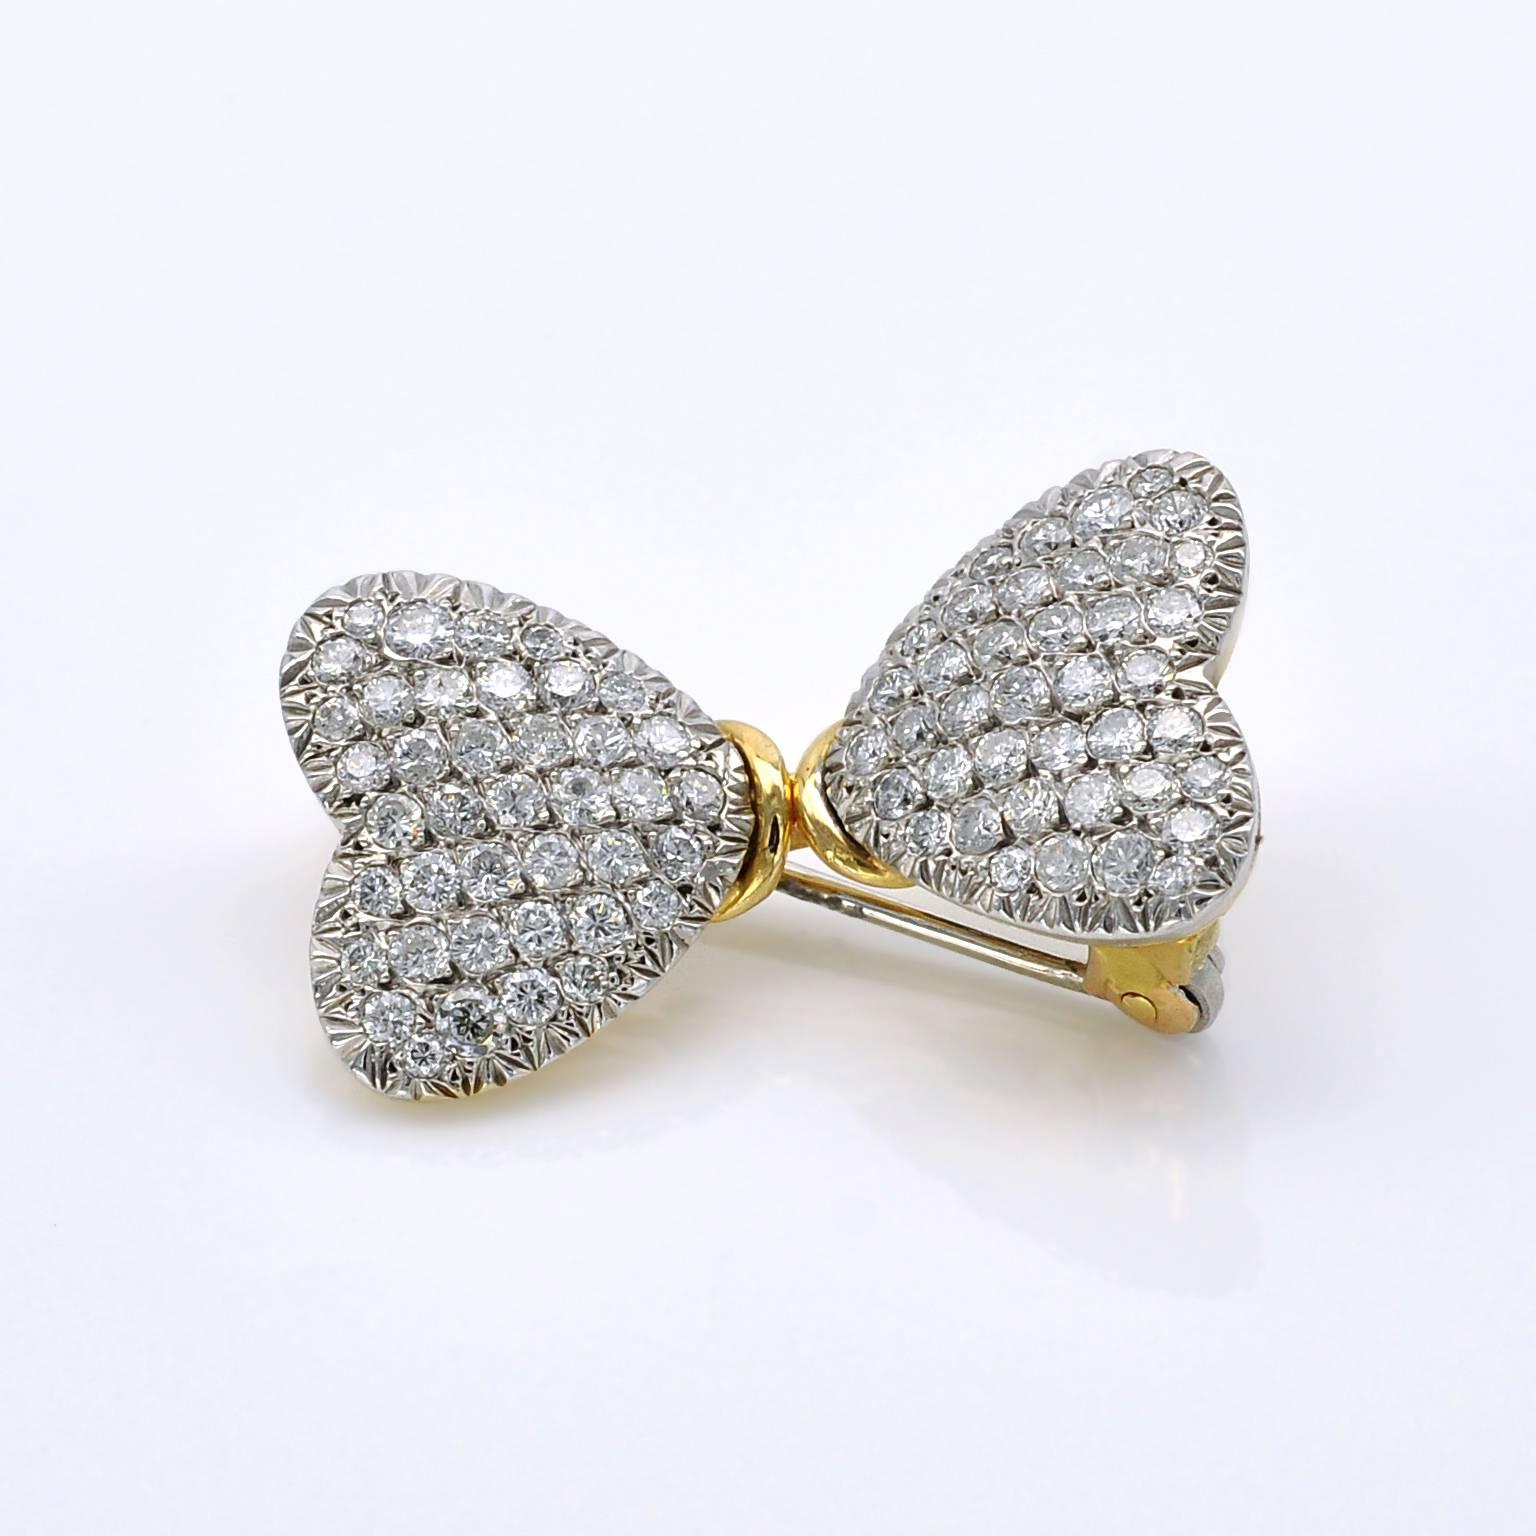 Two pave-set white gold hearts set with diamonds linked together by the point forming a butterfly shape. the back of the brooch is yellow gold.

Diamonds approximately:  1.5CT  color: G - clarity VS/SI 